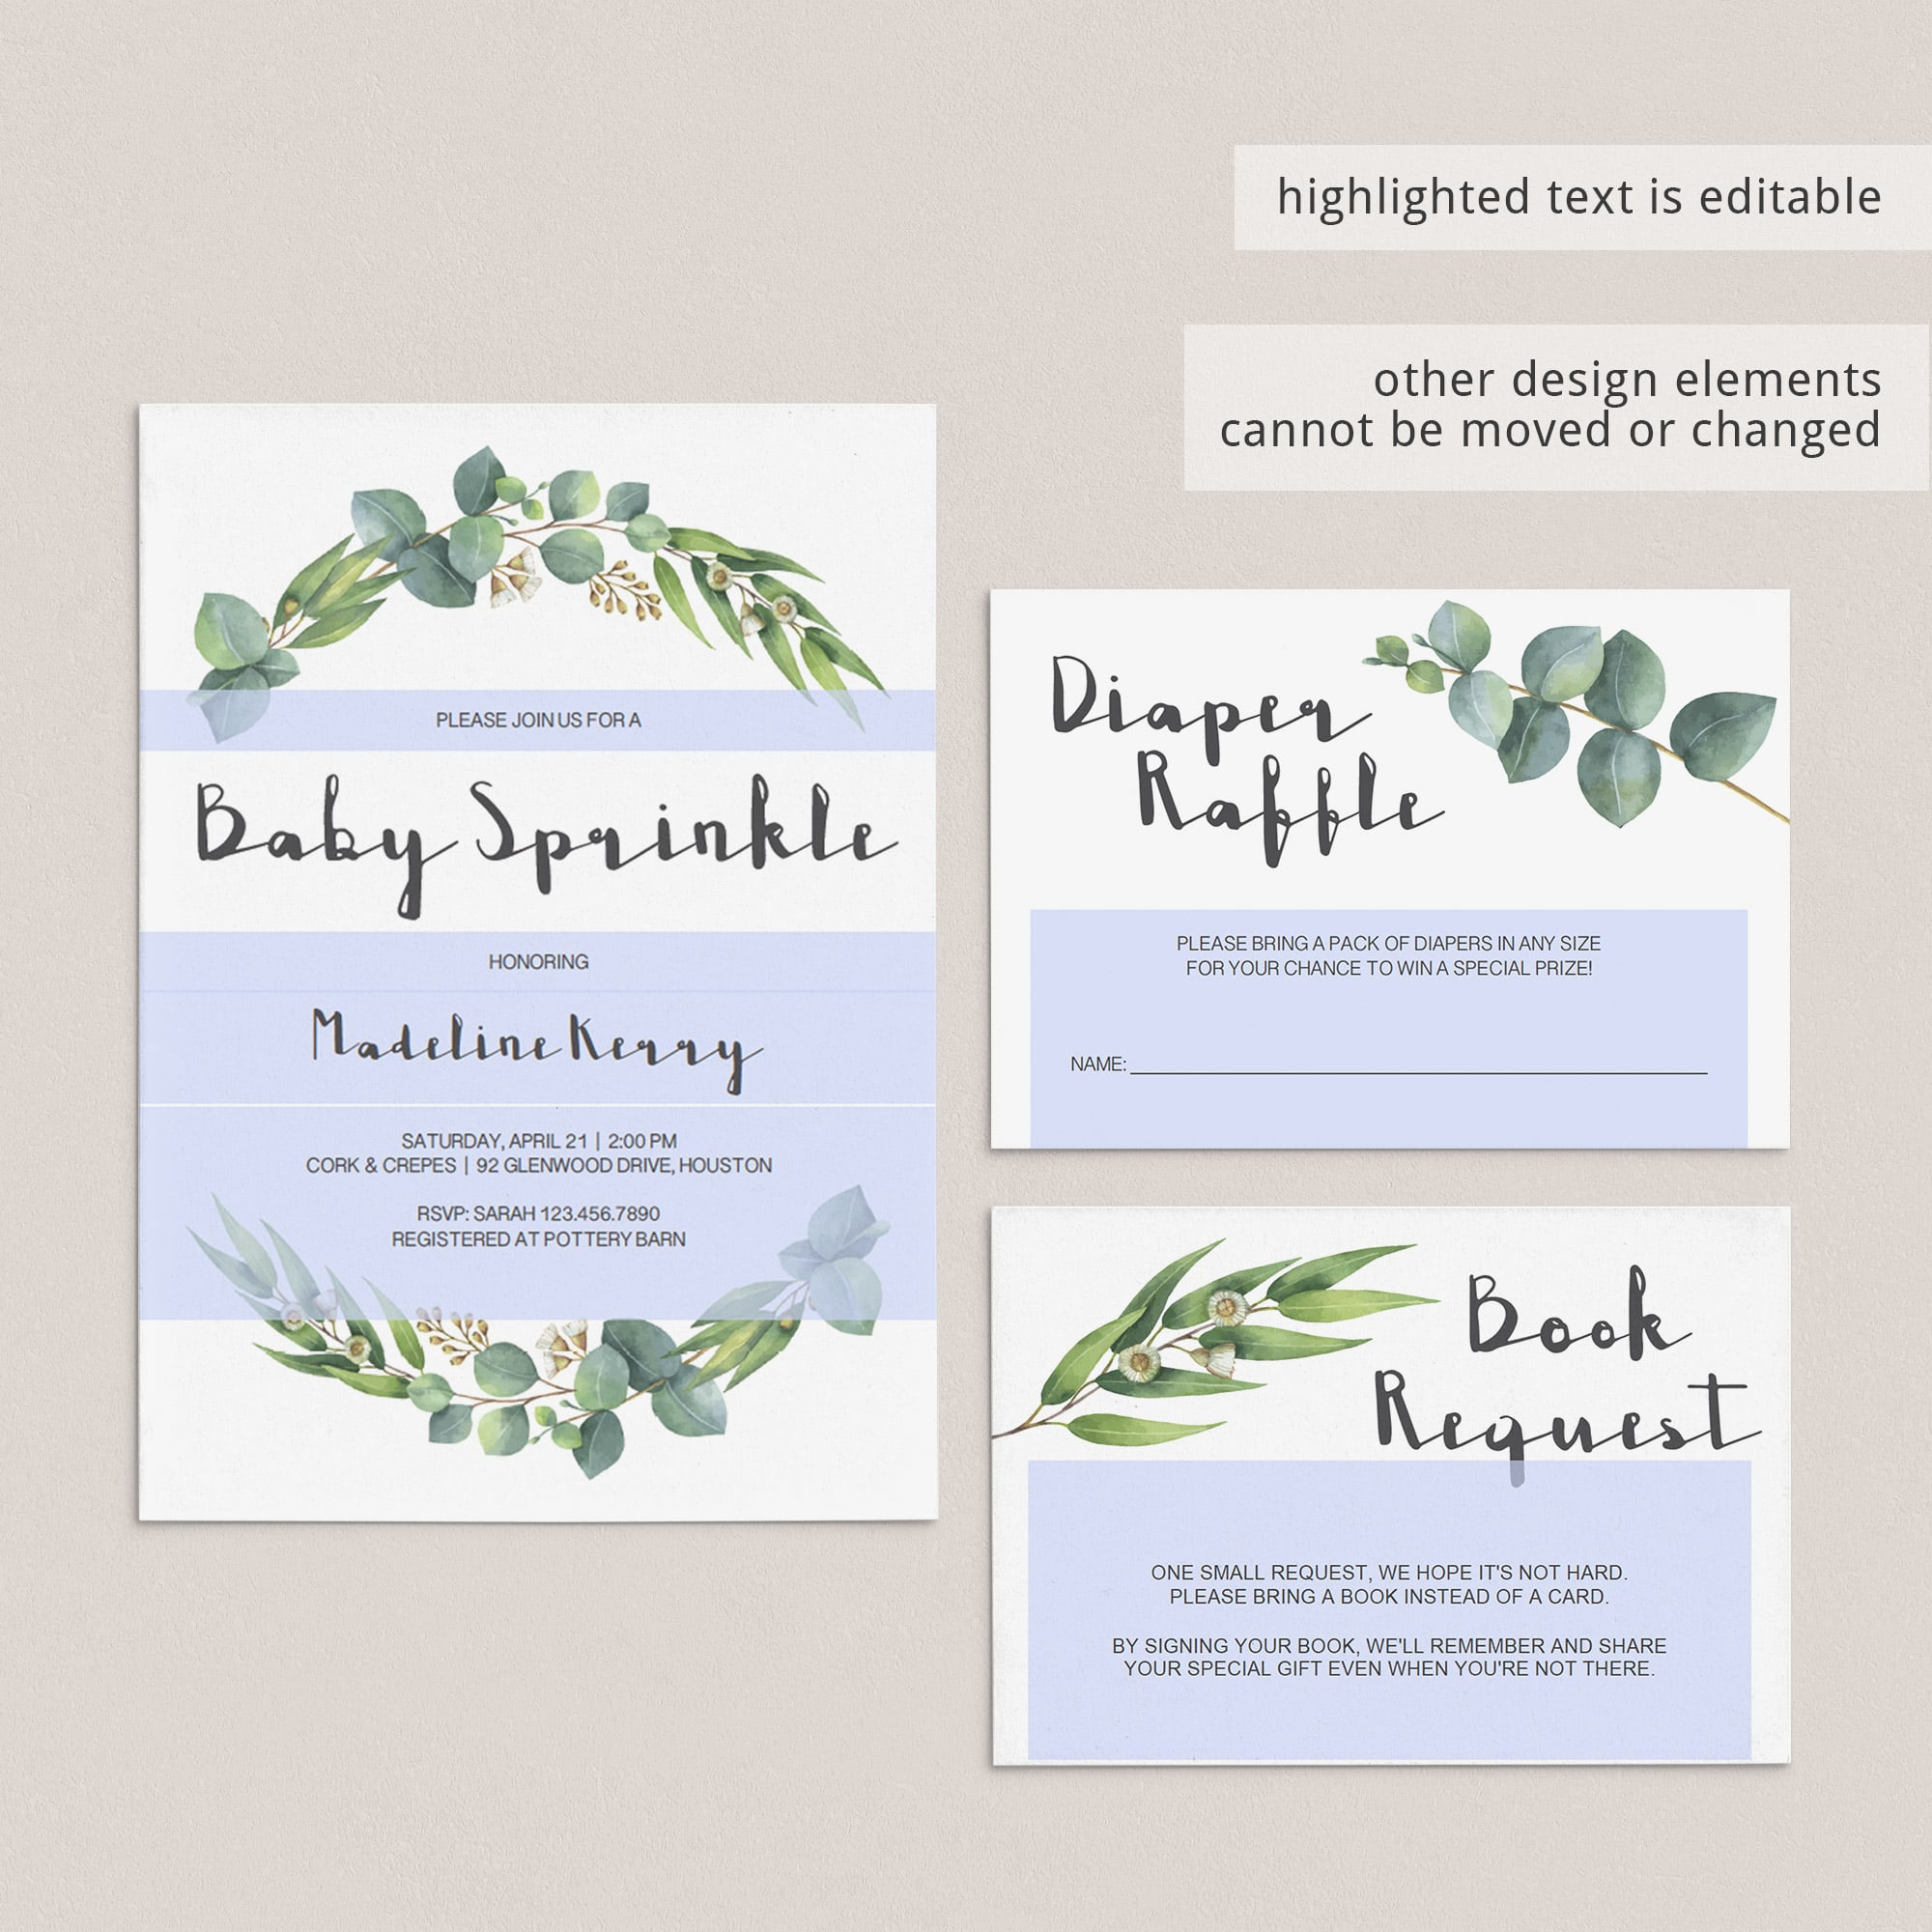 DIY baby sprinkle invite instant download botanical theme by LittleSizzle